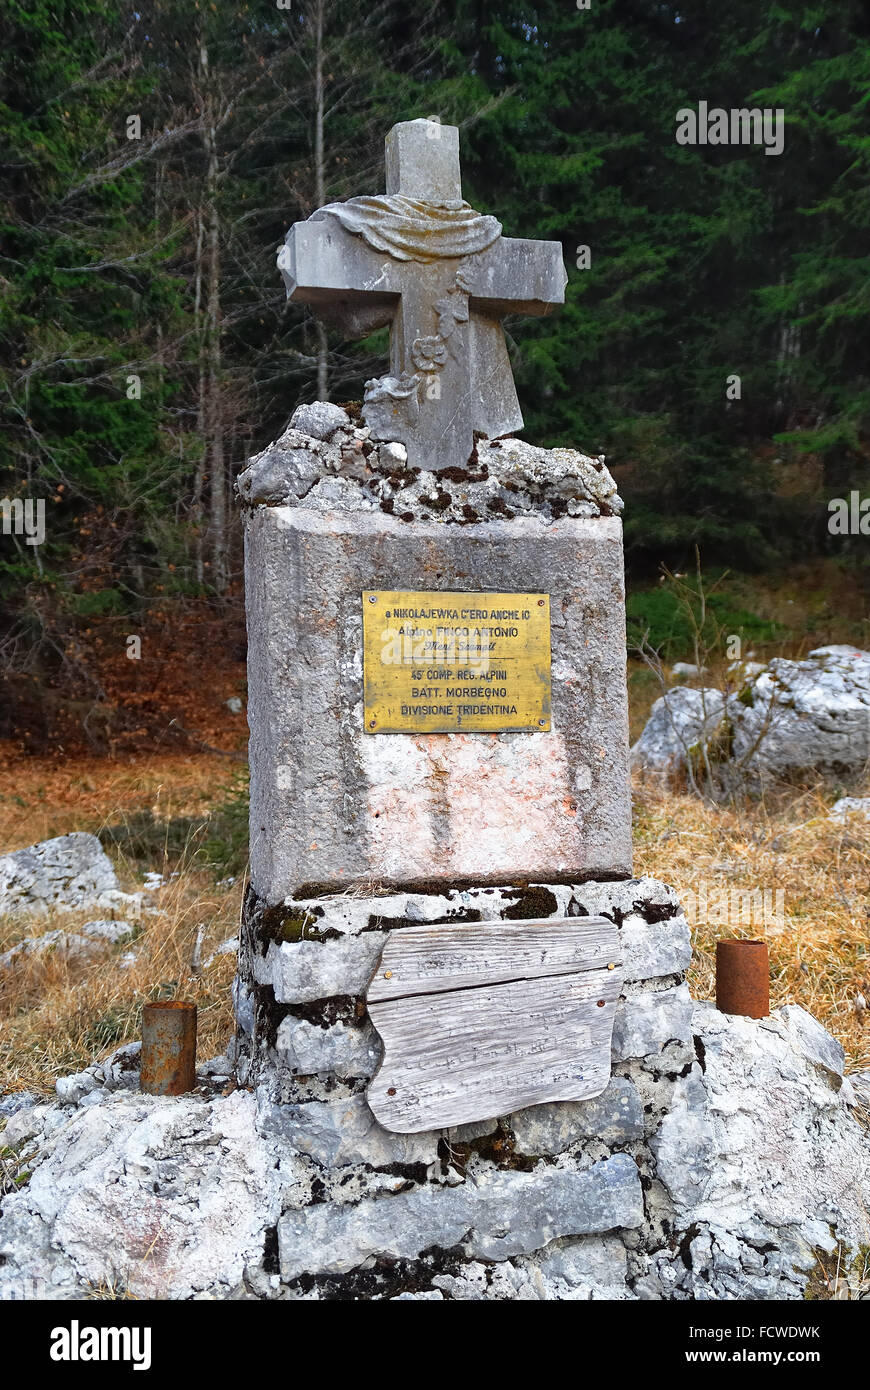 Gallio, Asiago Plateau. Stone monument in memory of the Alpini who died in Russian retreat after the battle of Nikolayevka. The monument was commissioned by the veteran of the Russian retreat Antonio Finco. Stock Photo